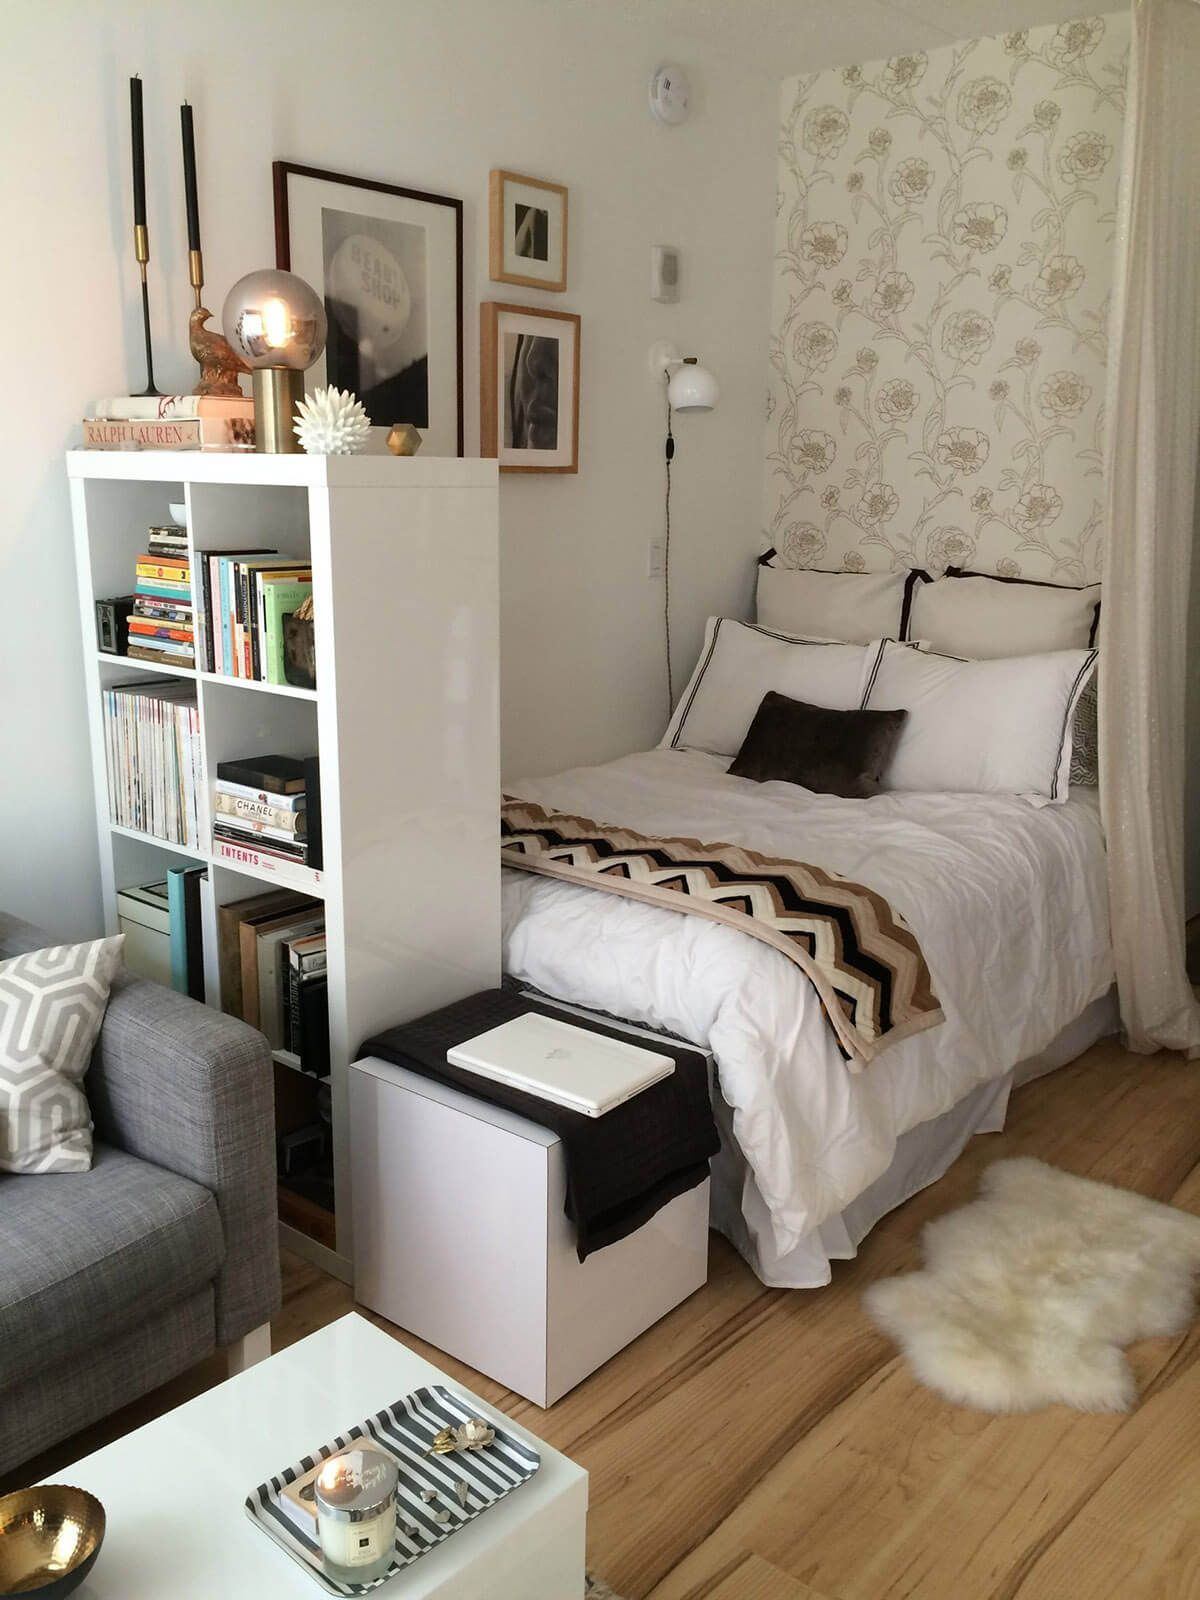 10 Spectacular Creative Ideas For Small Bedrooms small bedroom ideas with a tall bookshelf dresses n creative ideas 2024